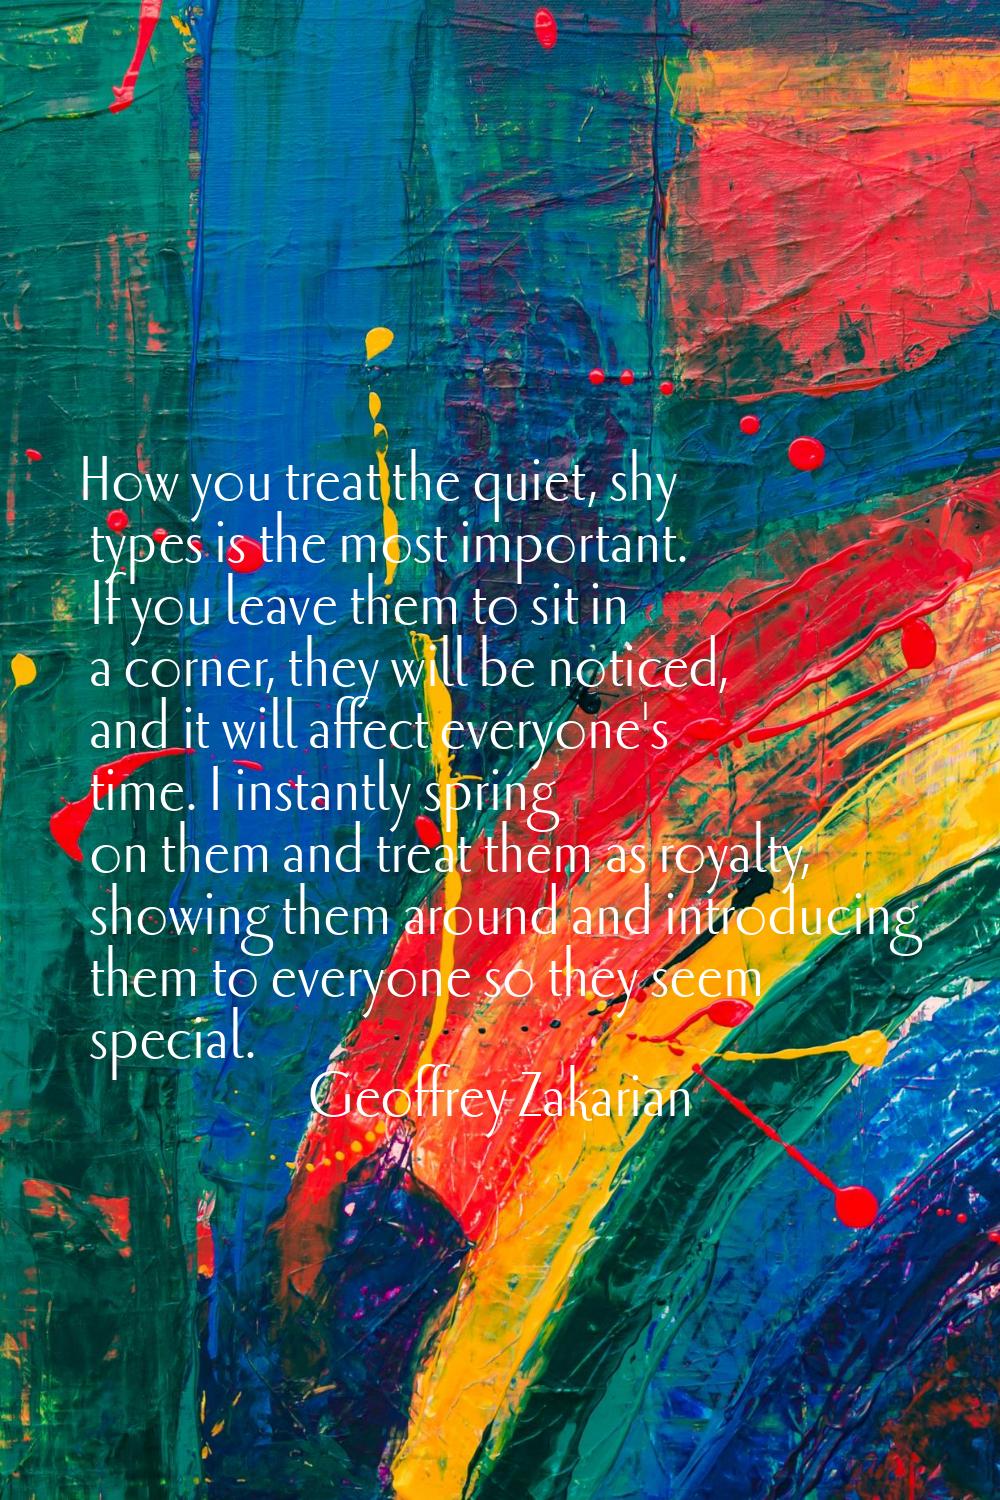 How you treat the quiet, shy types is the most important. If you leave them to sit in a corner, the